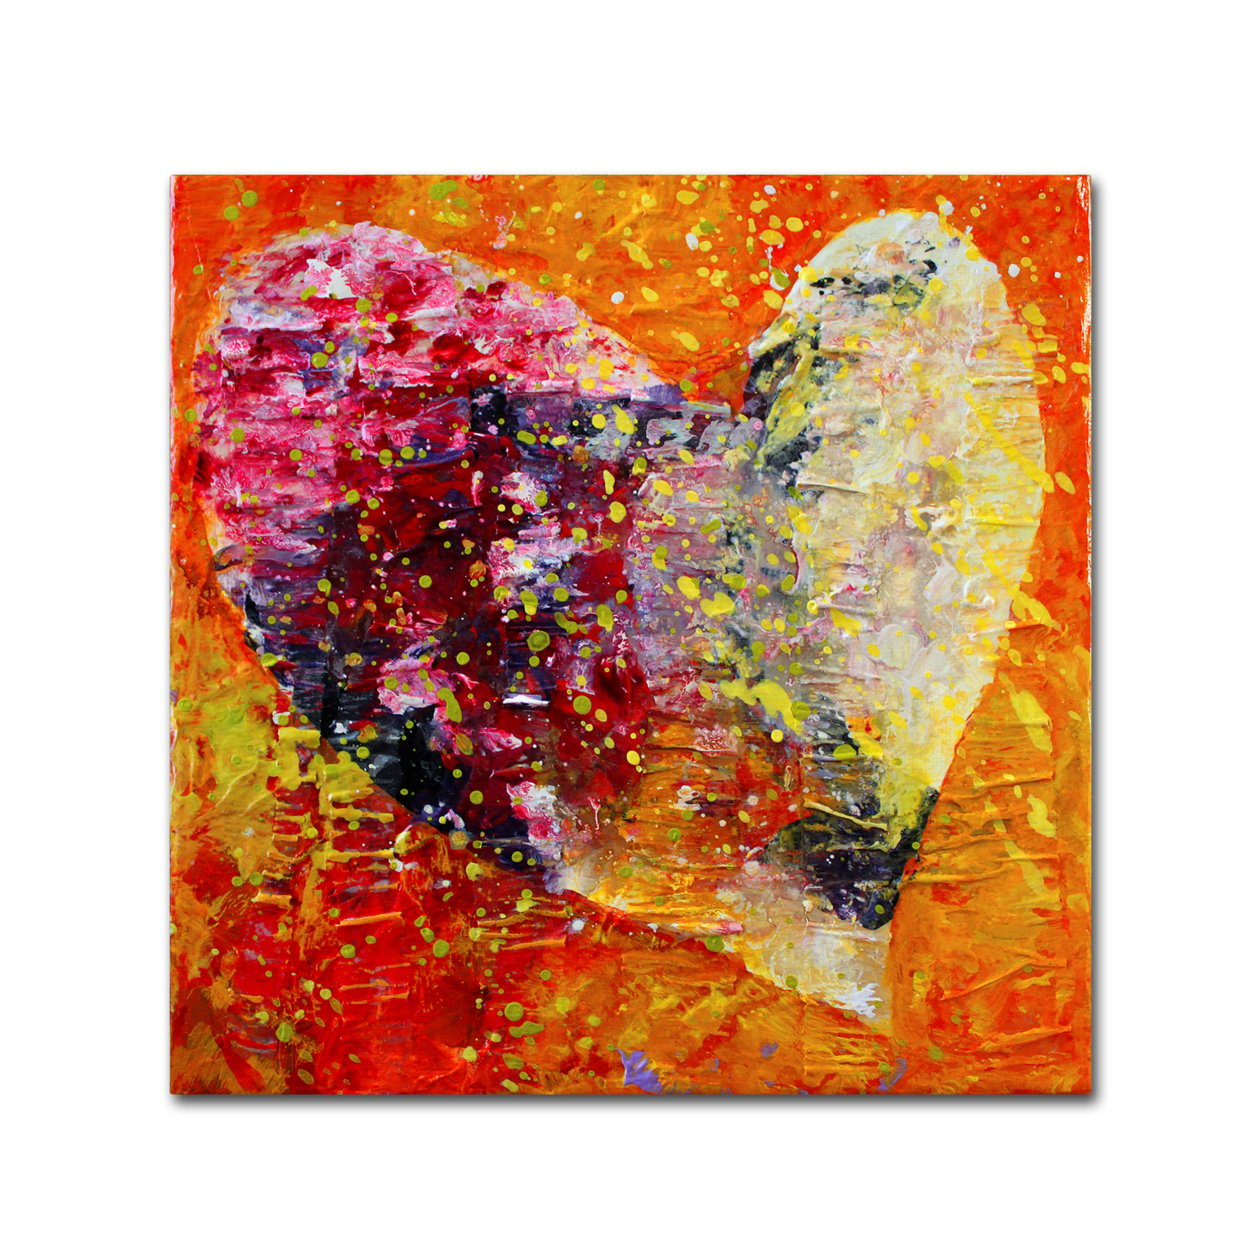 Marion Rose 'Heart' Ready To Hang Canvas Art 24 X 24 Inches Made In USA